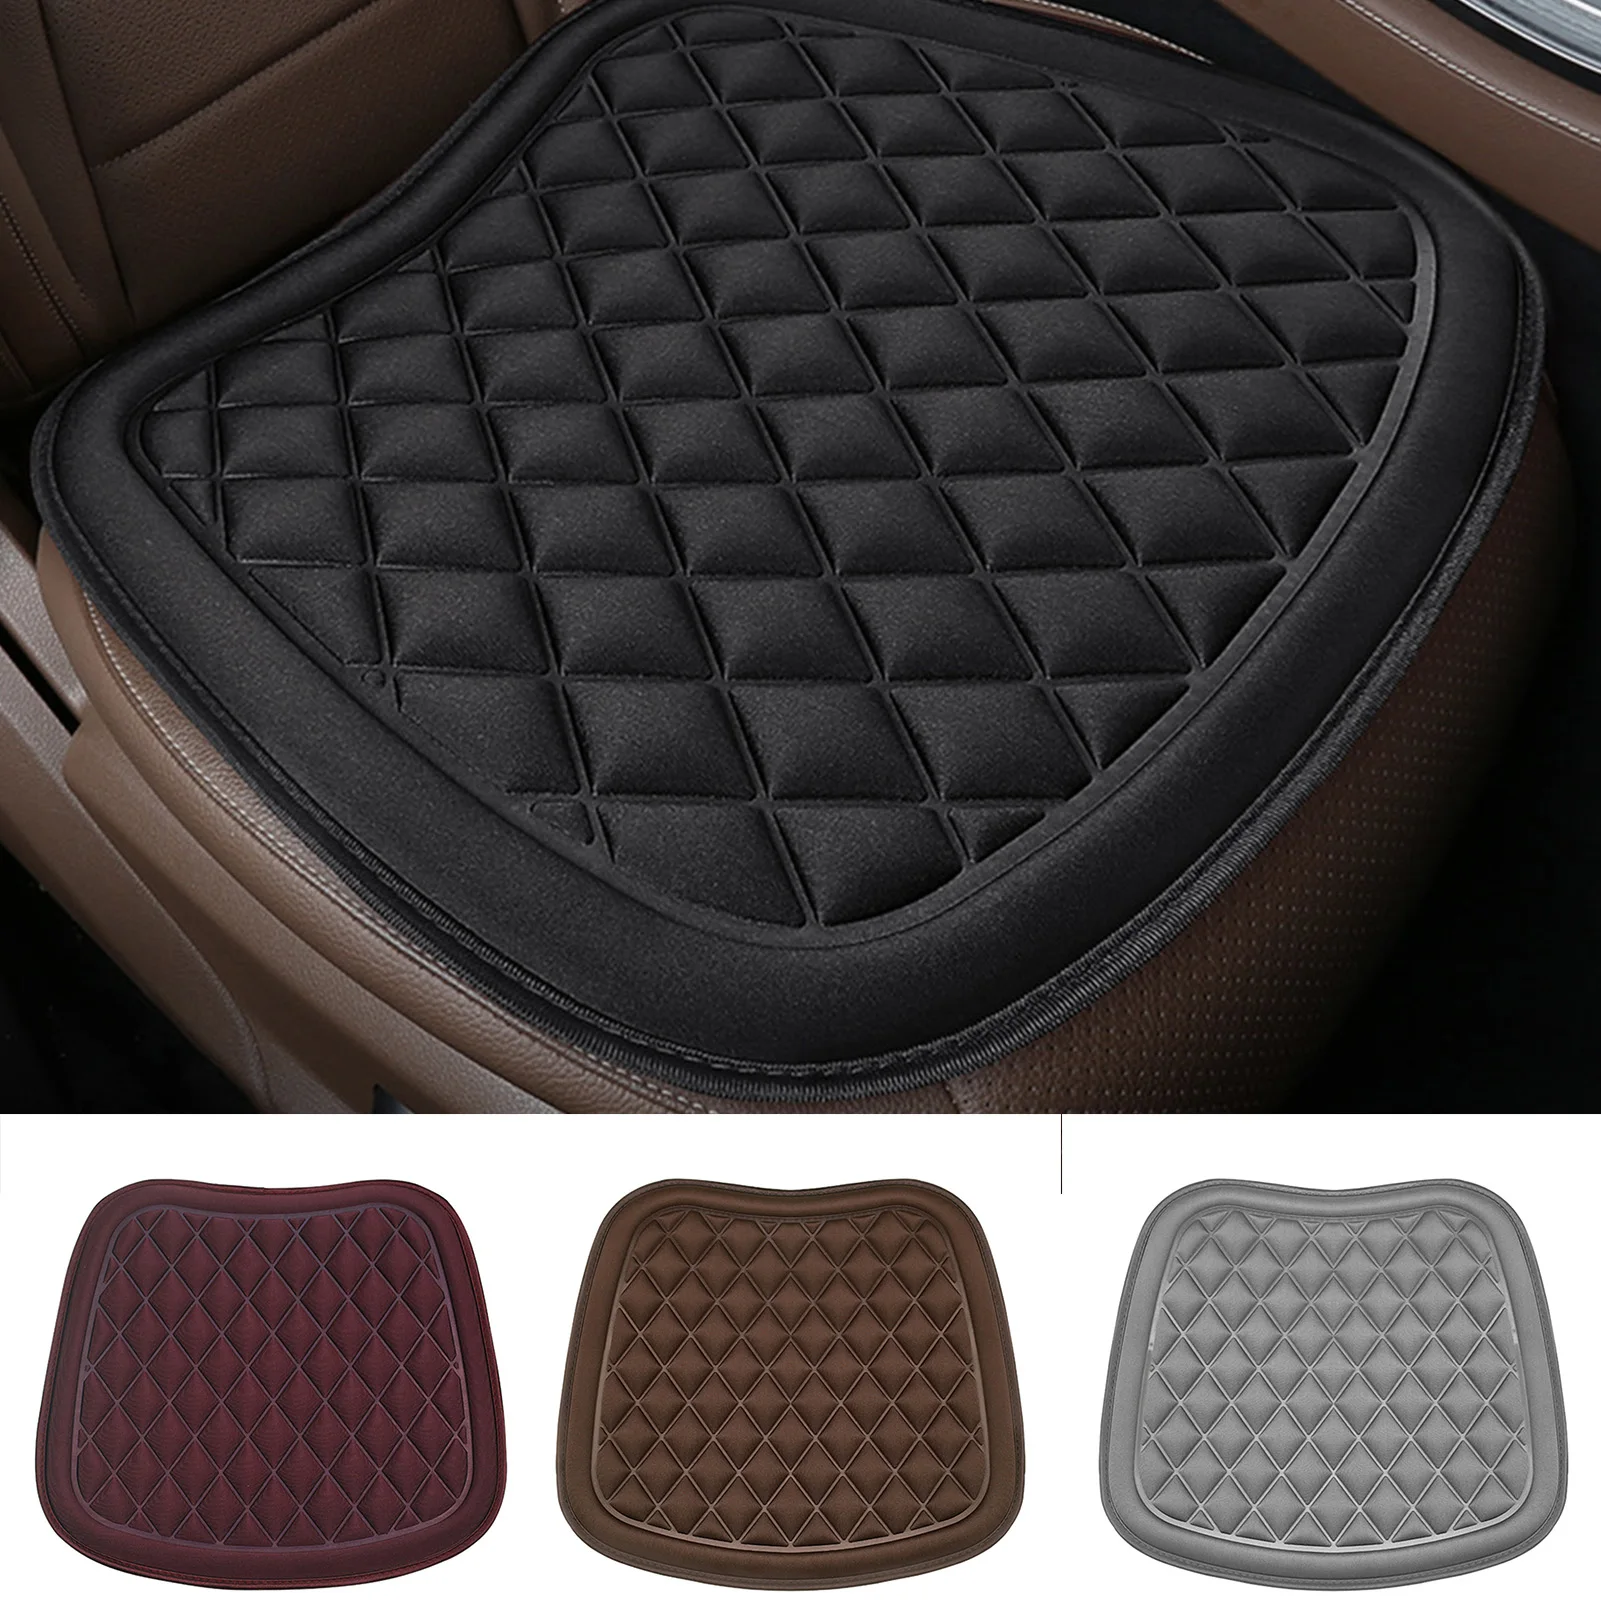 Seat Cushion Nonslip Chair Pad Breathable Hip Protector For Wheelchair Office Chair Cars Home Living Pressure Relief 45X45CM